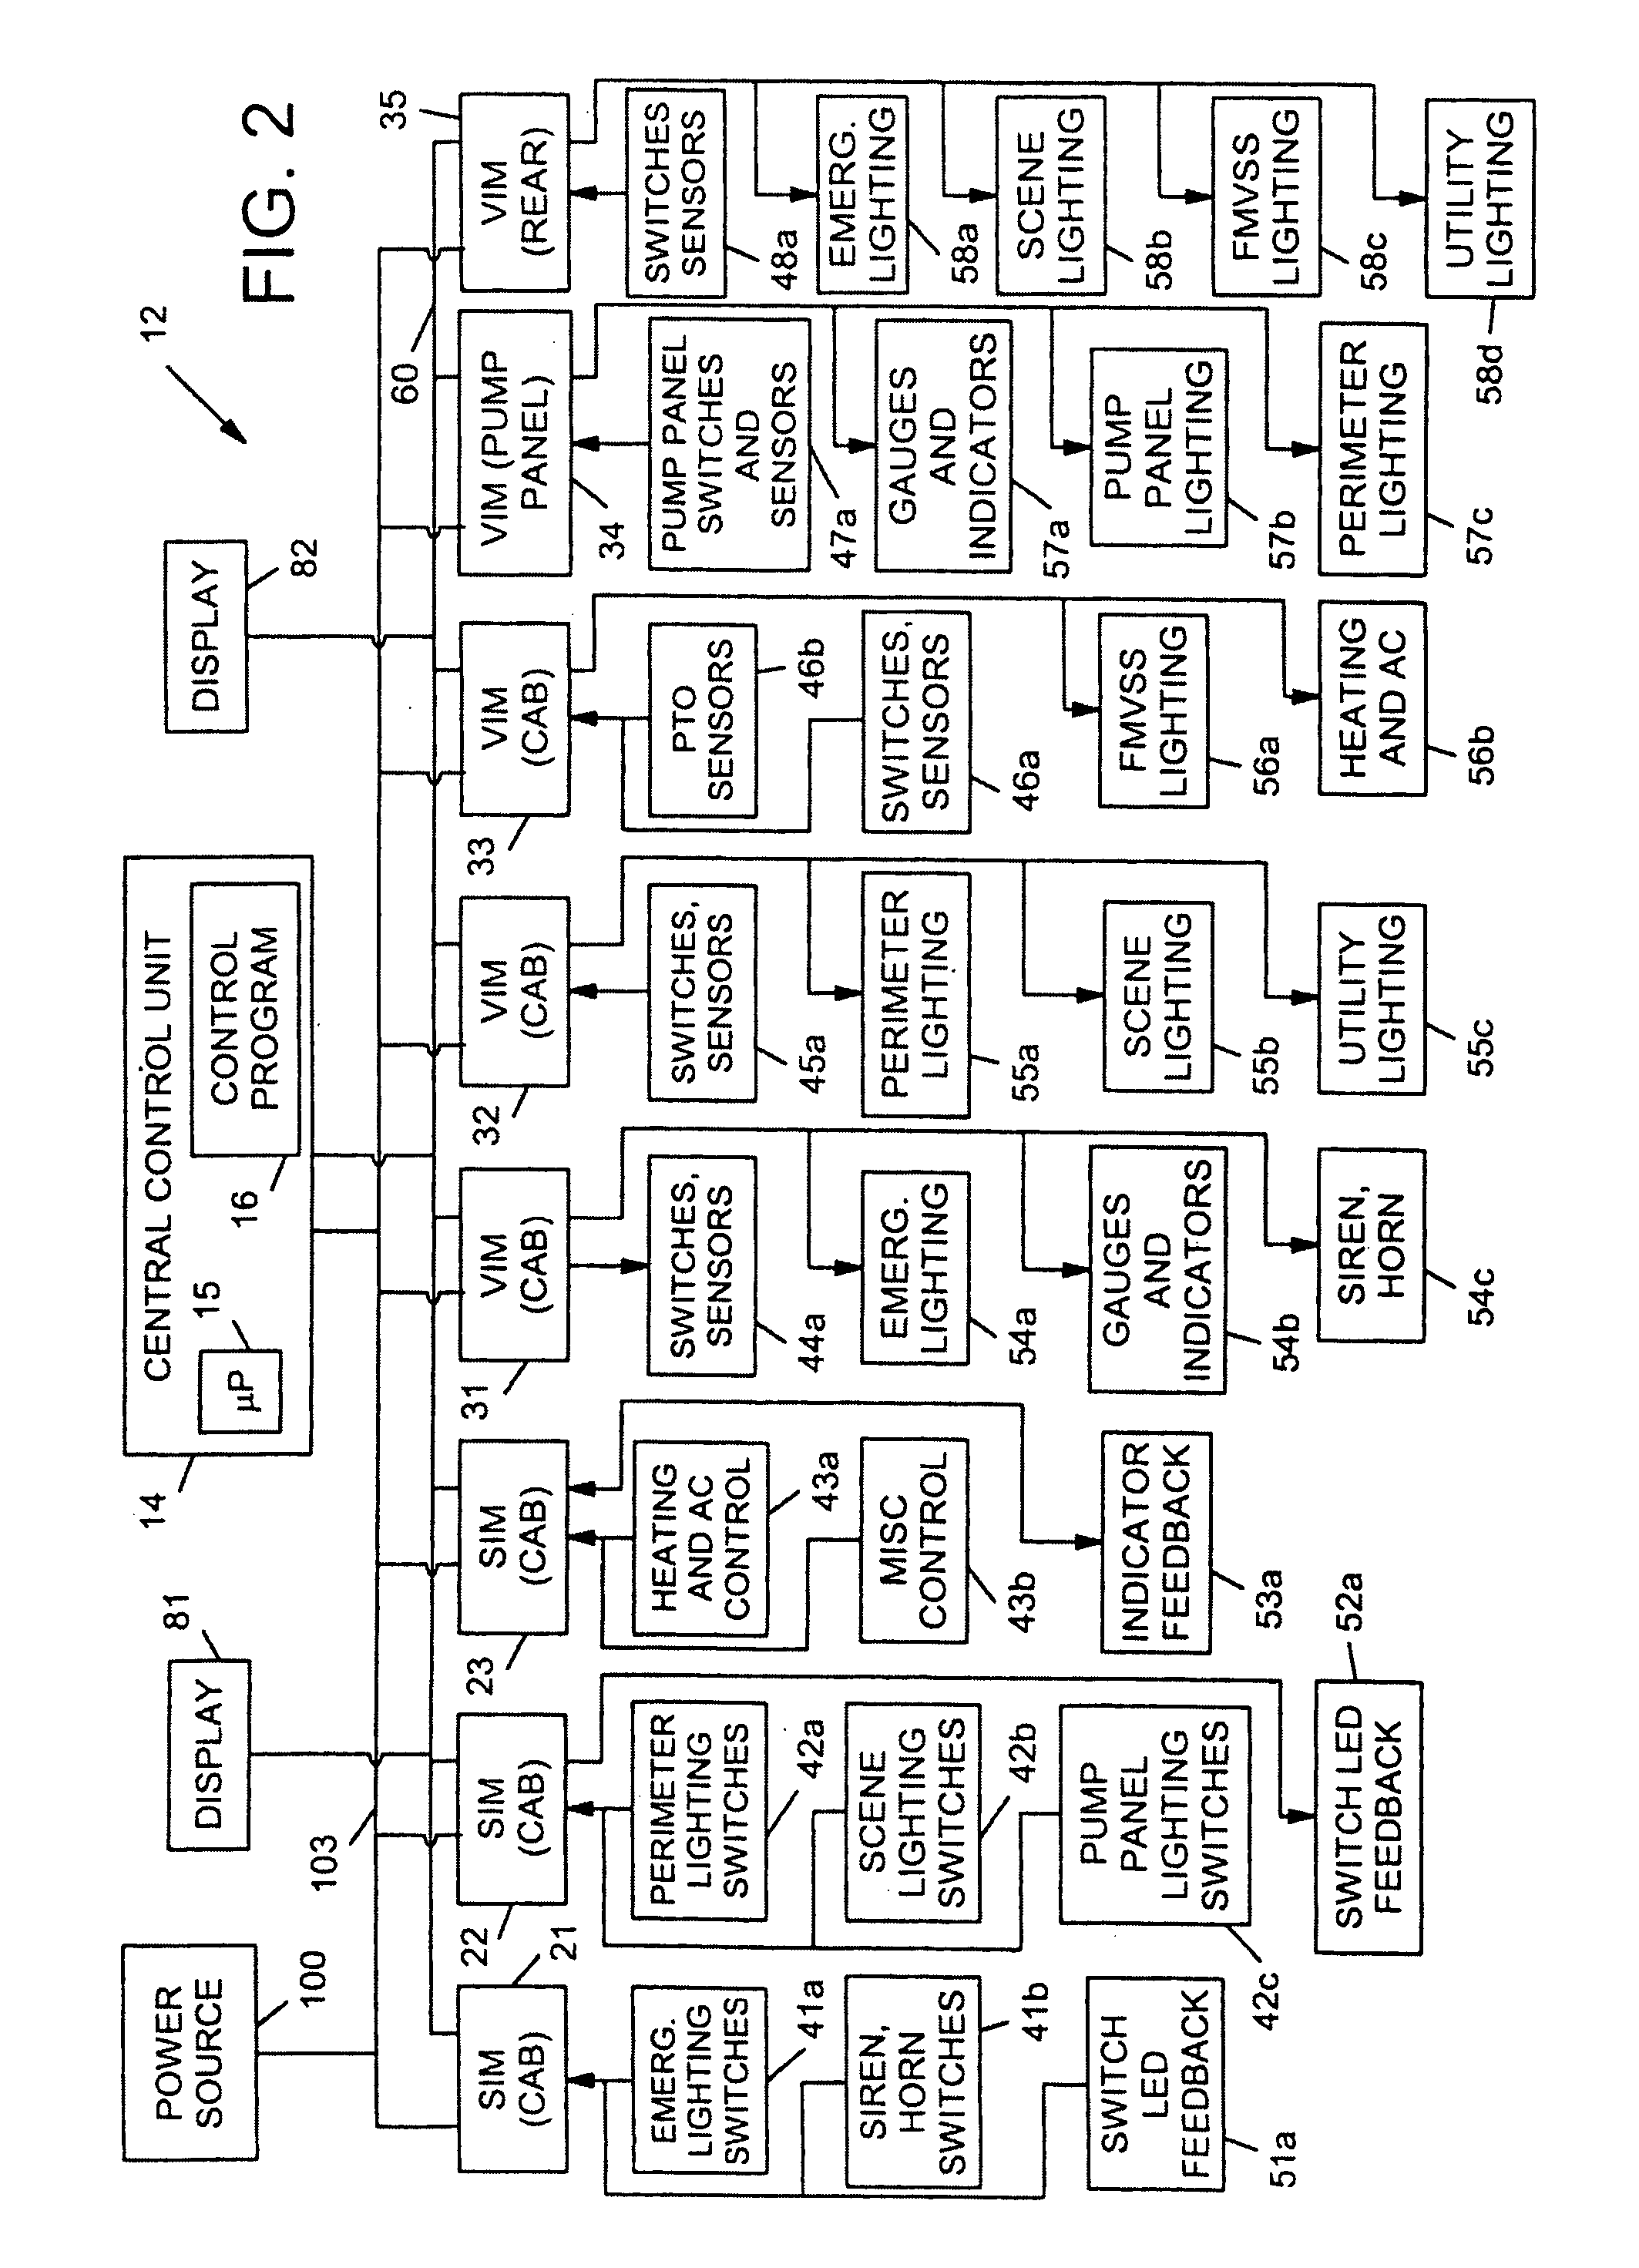 Turret envelope control system and method for a vehicle